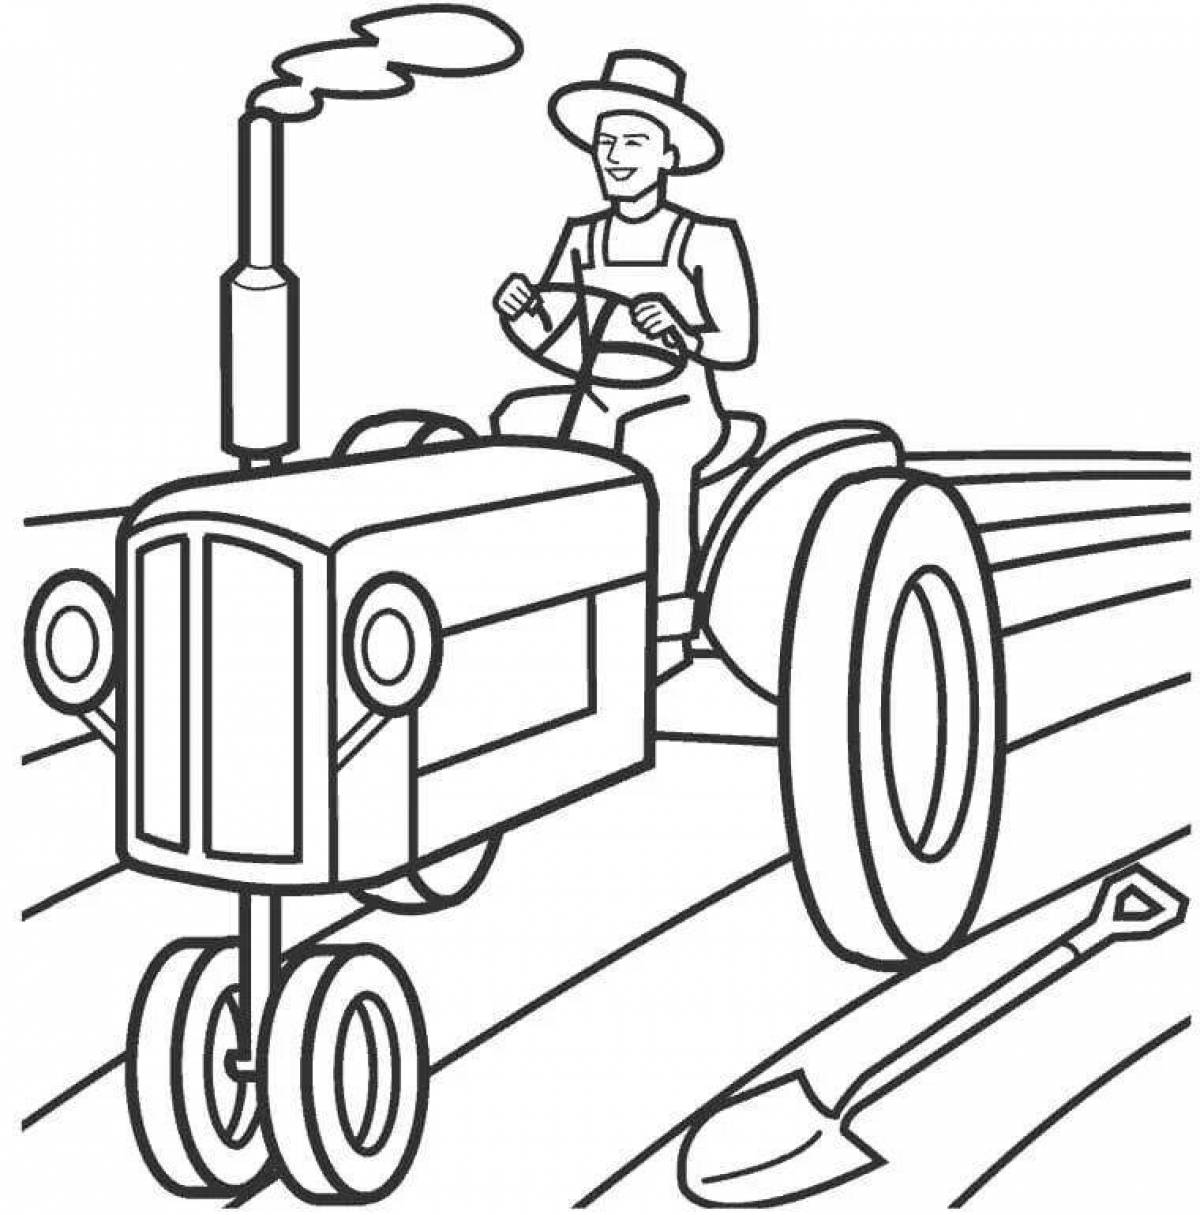 Colorful tractor driver coloring page